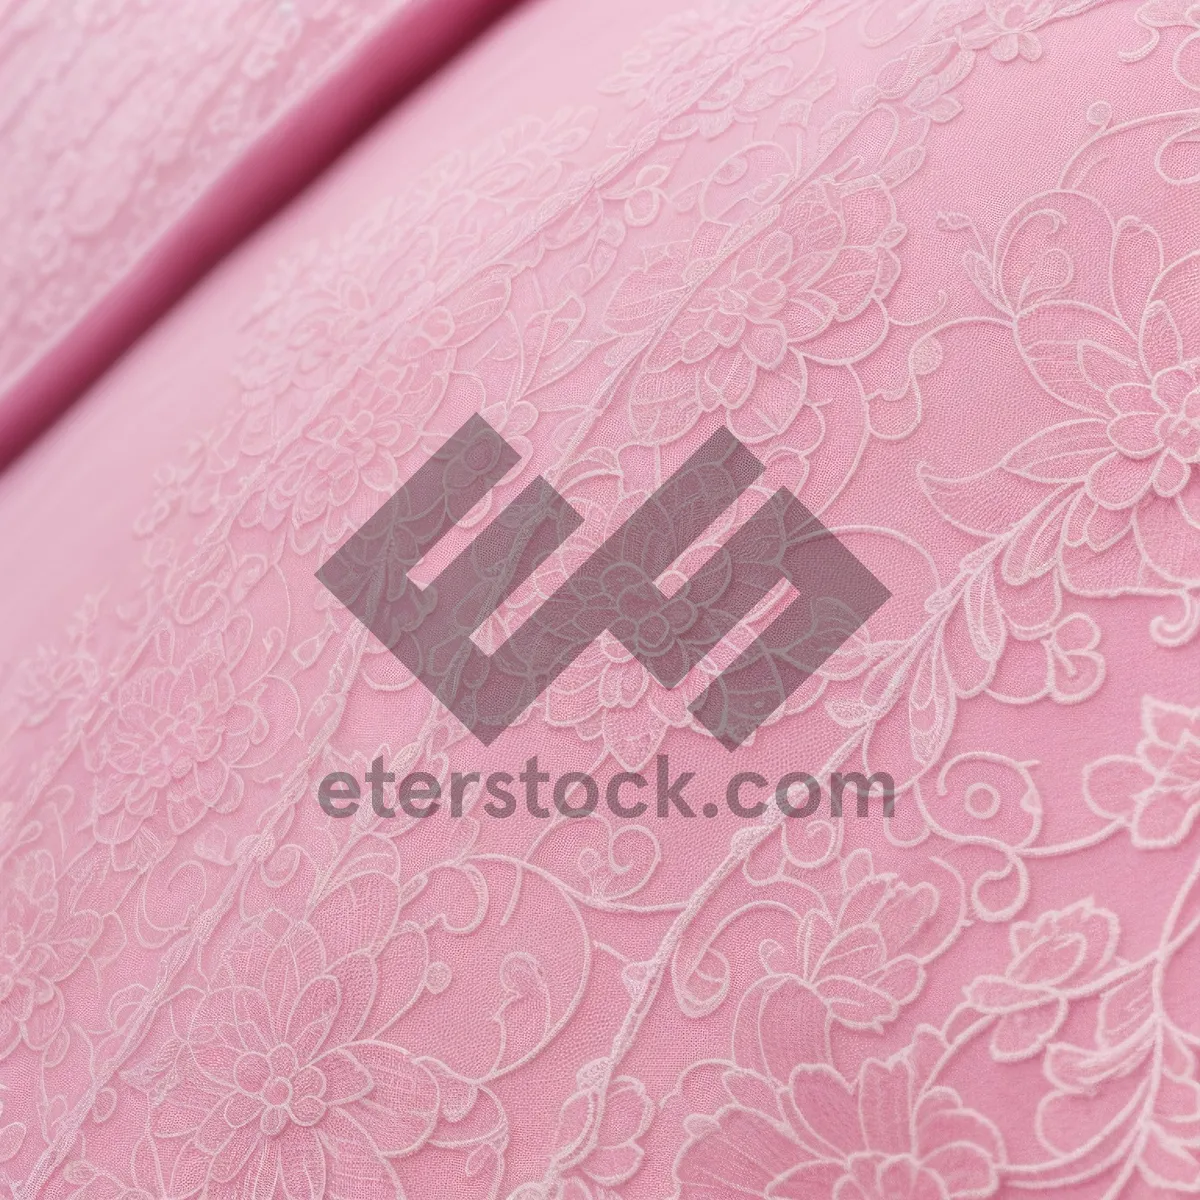 Picture of Vintage Floral Damask Seamless Pattern Wallpaper